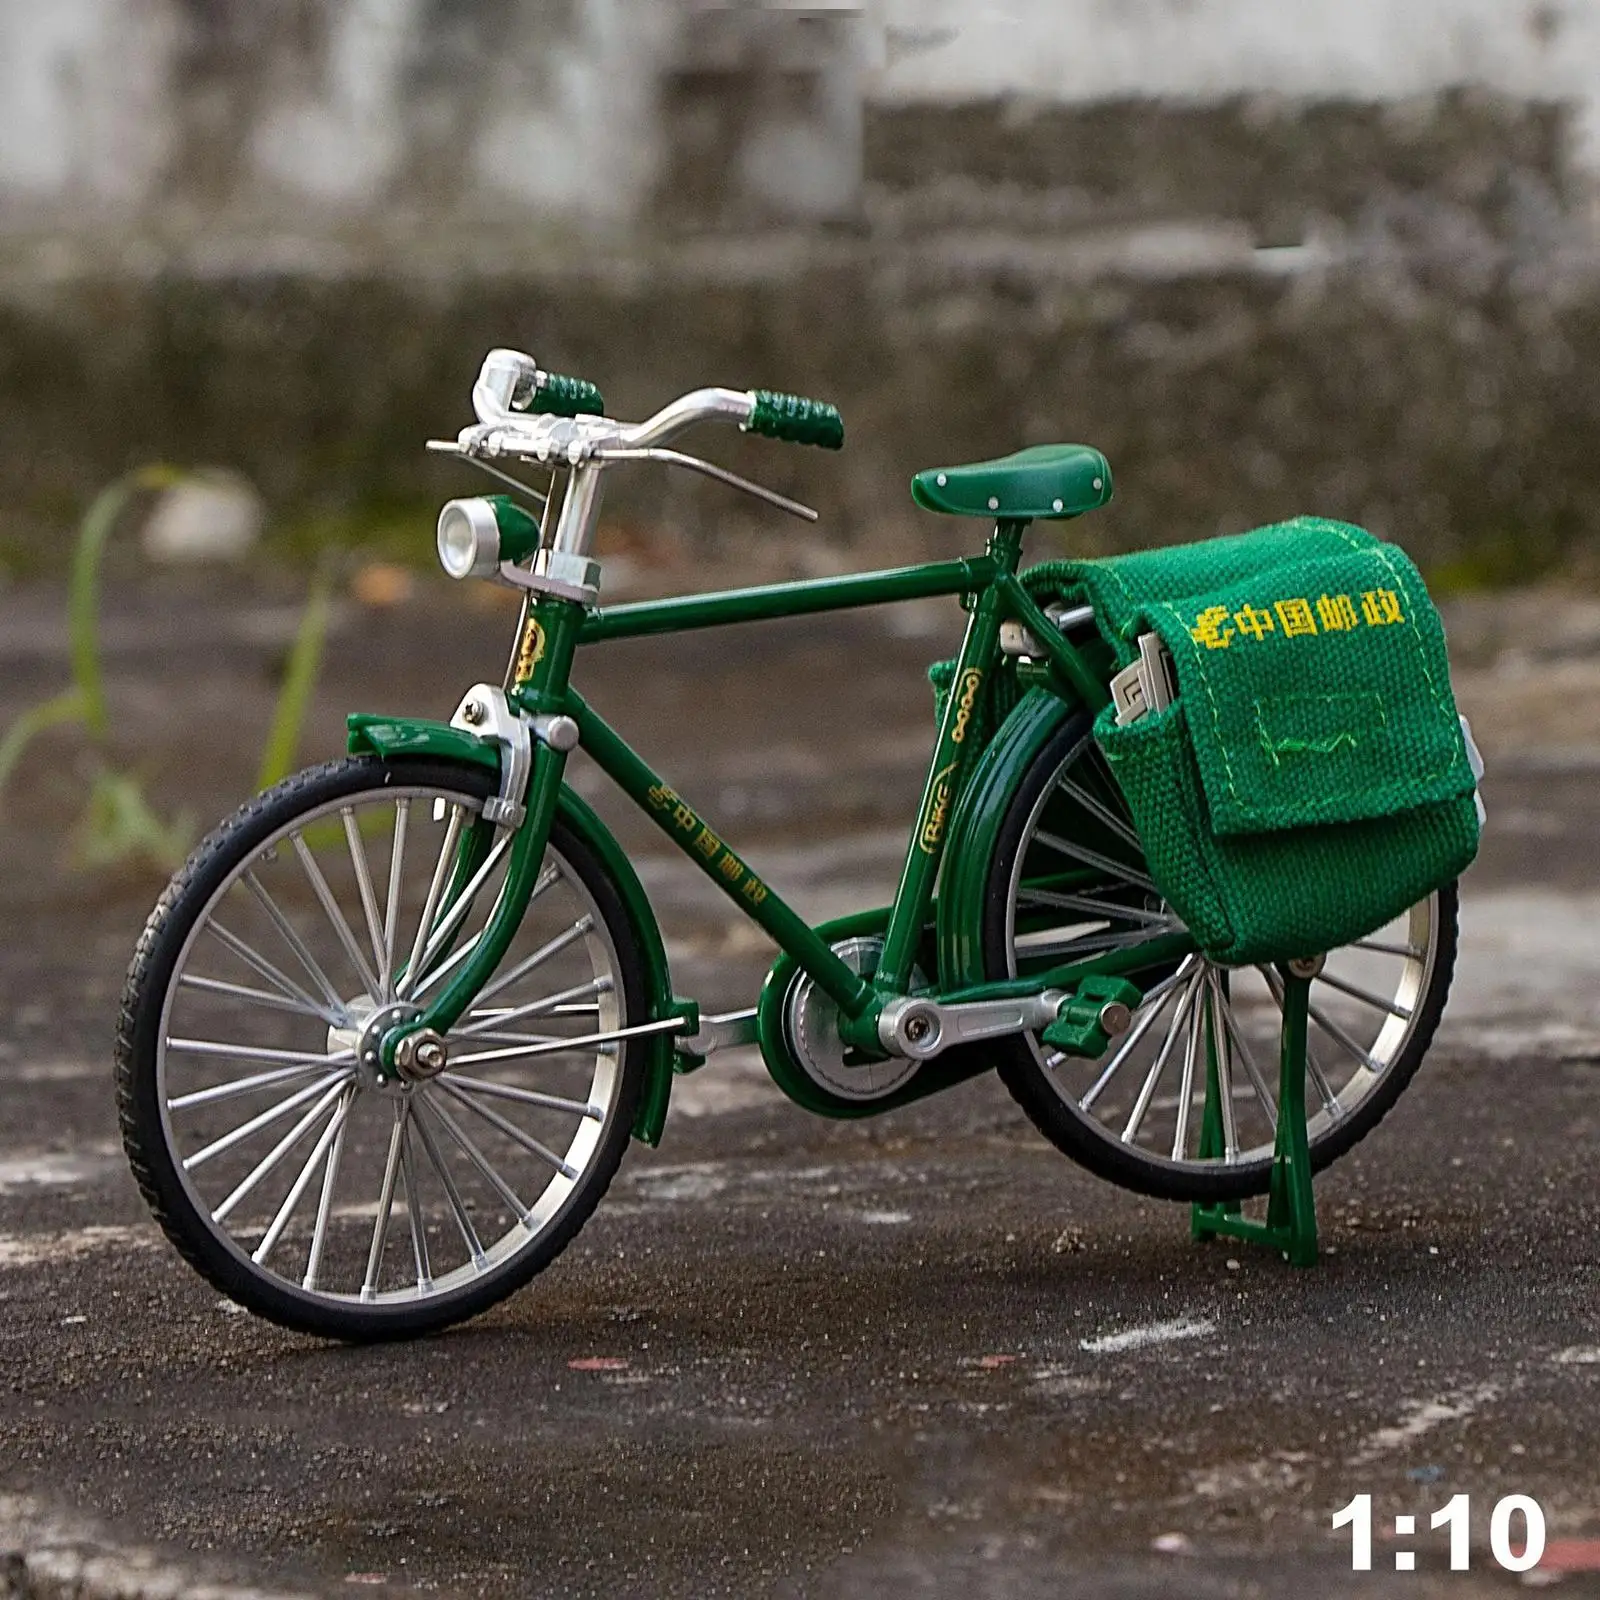 1:10 Bicycle Model Figurine Handicraft Decor China Post Bike Toy for Office